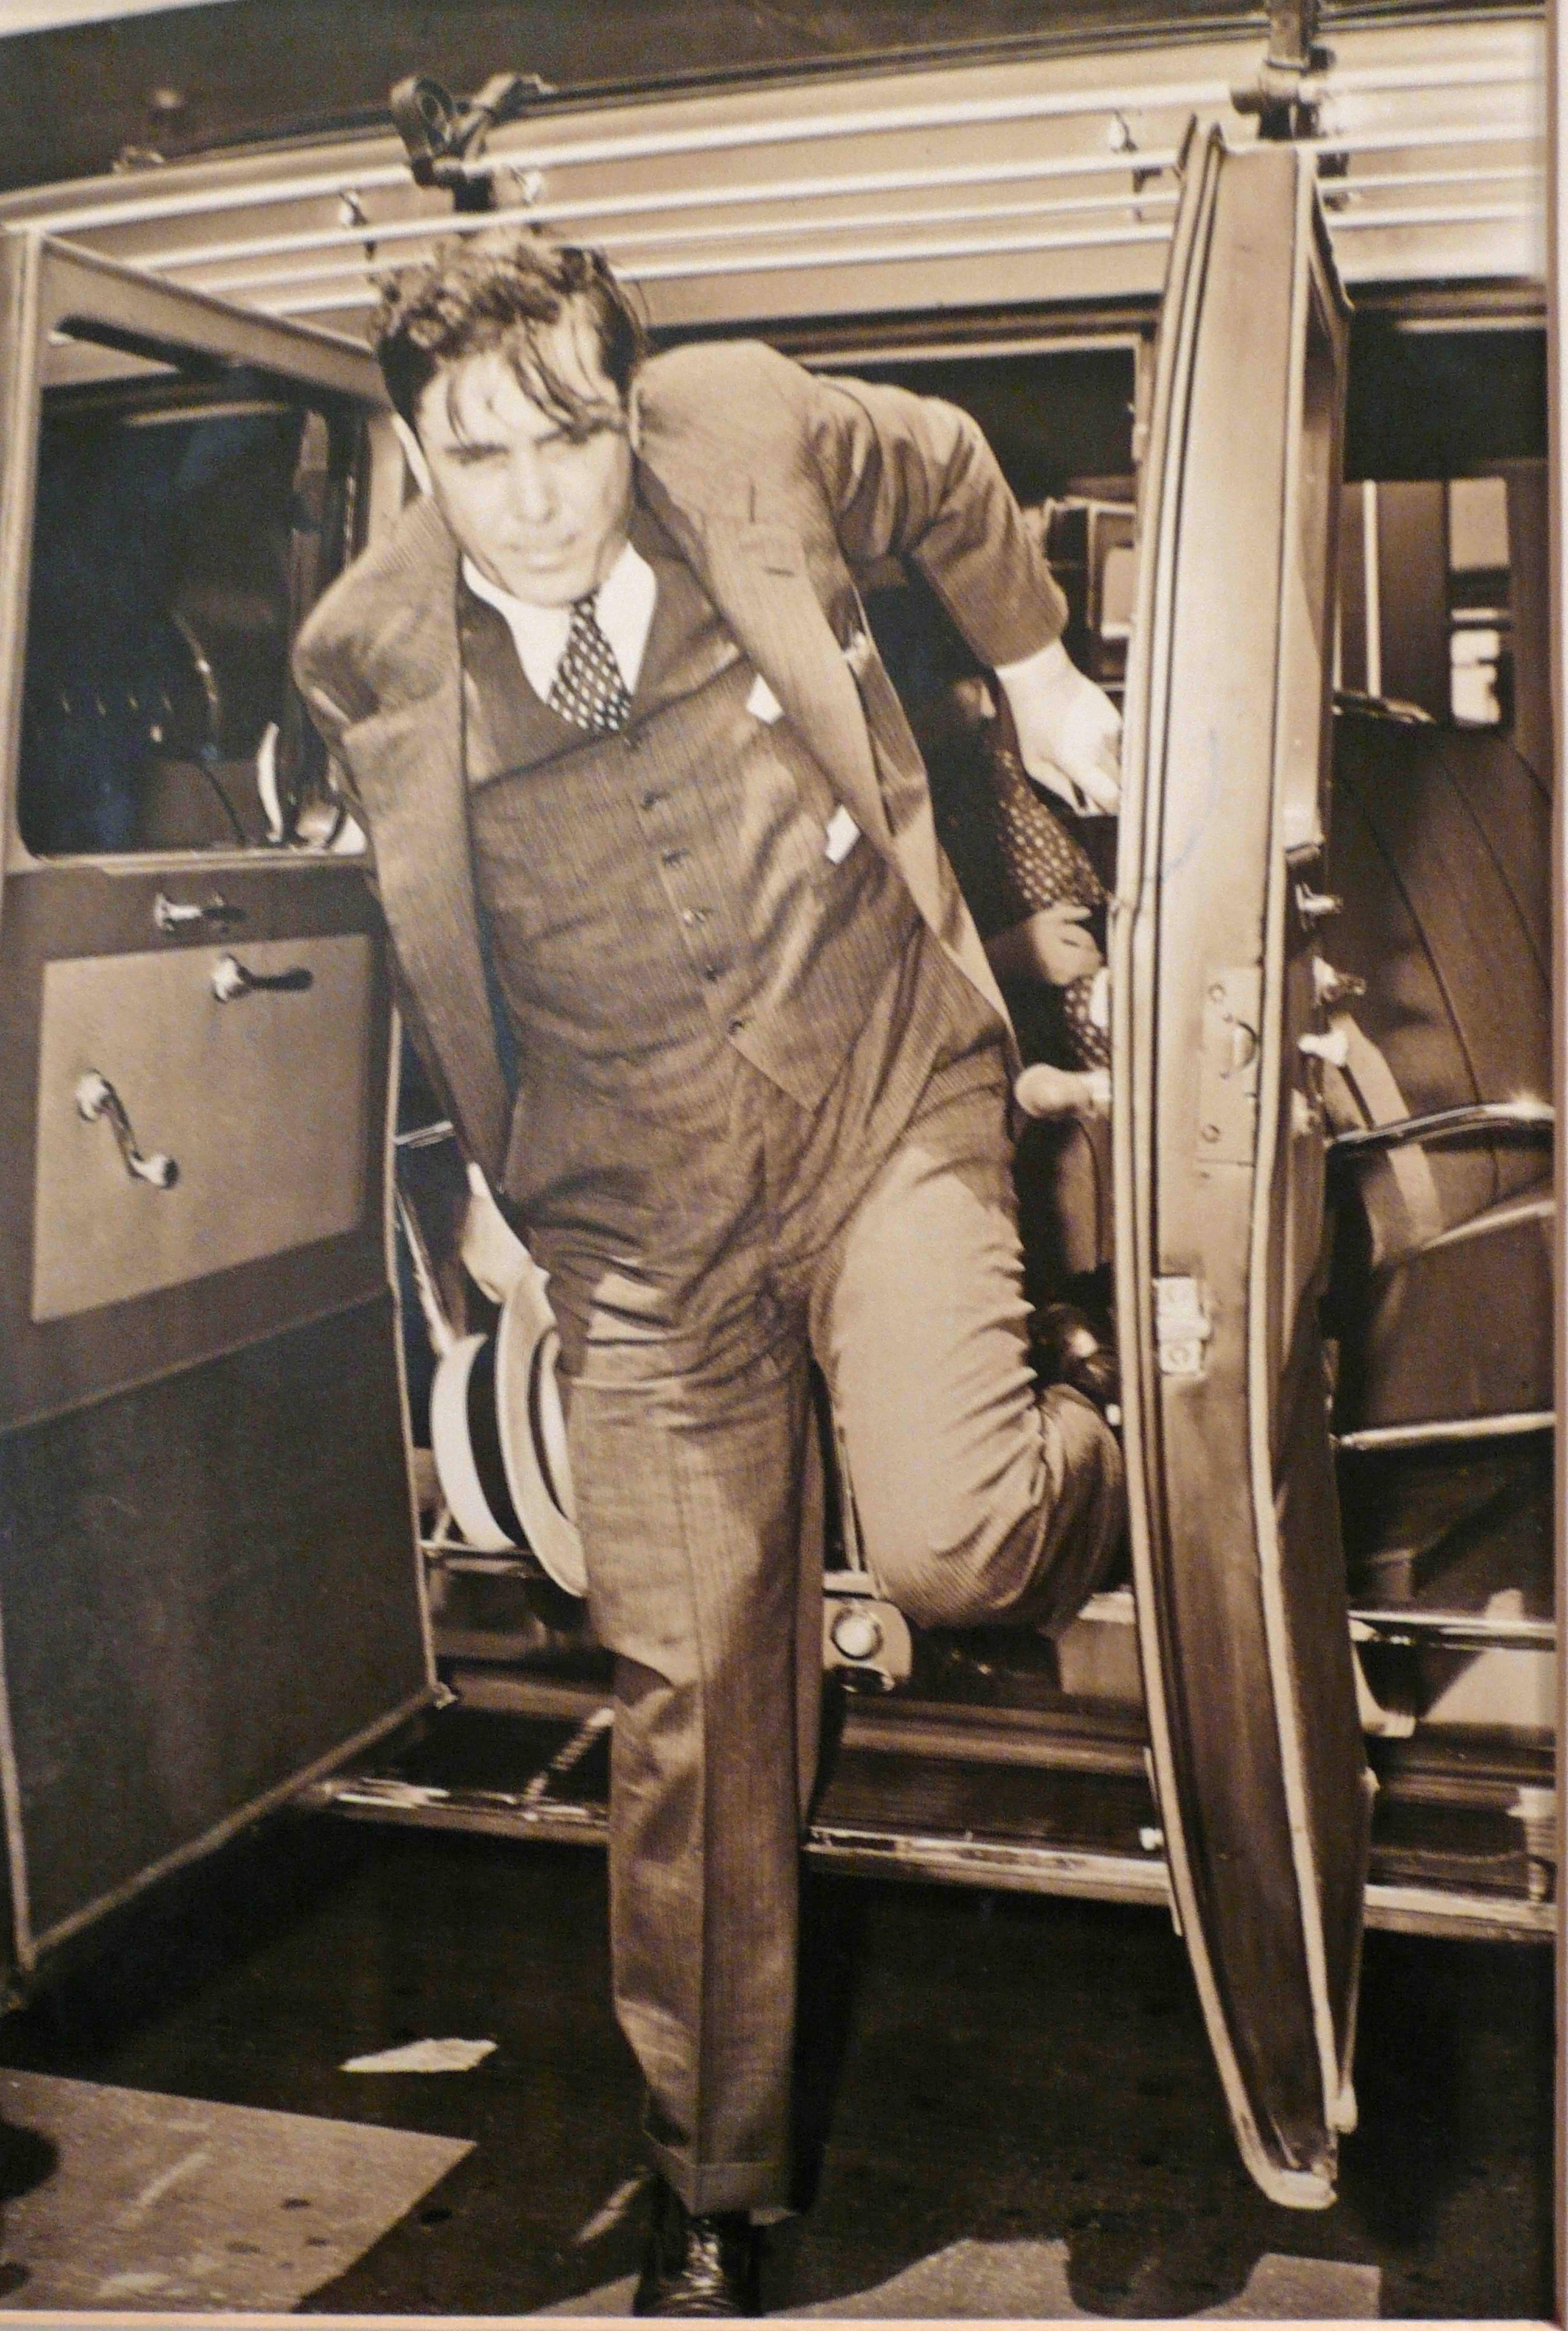 WENDELL WILLKIE STEPPING OUT OF A CAR